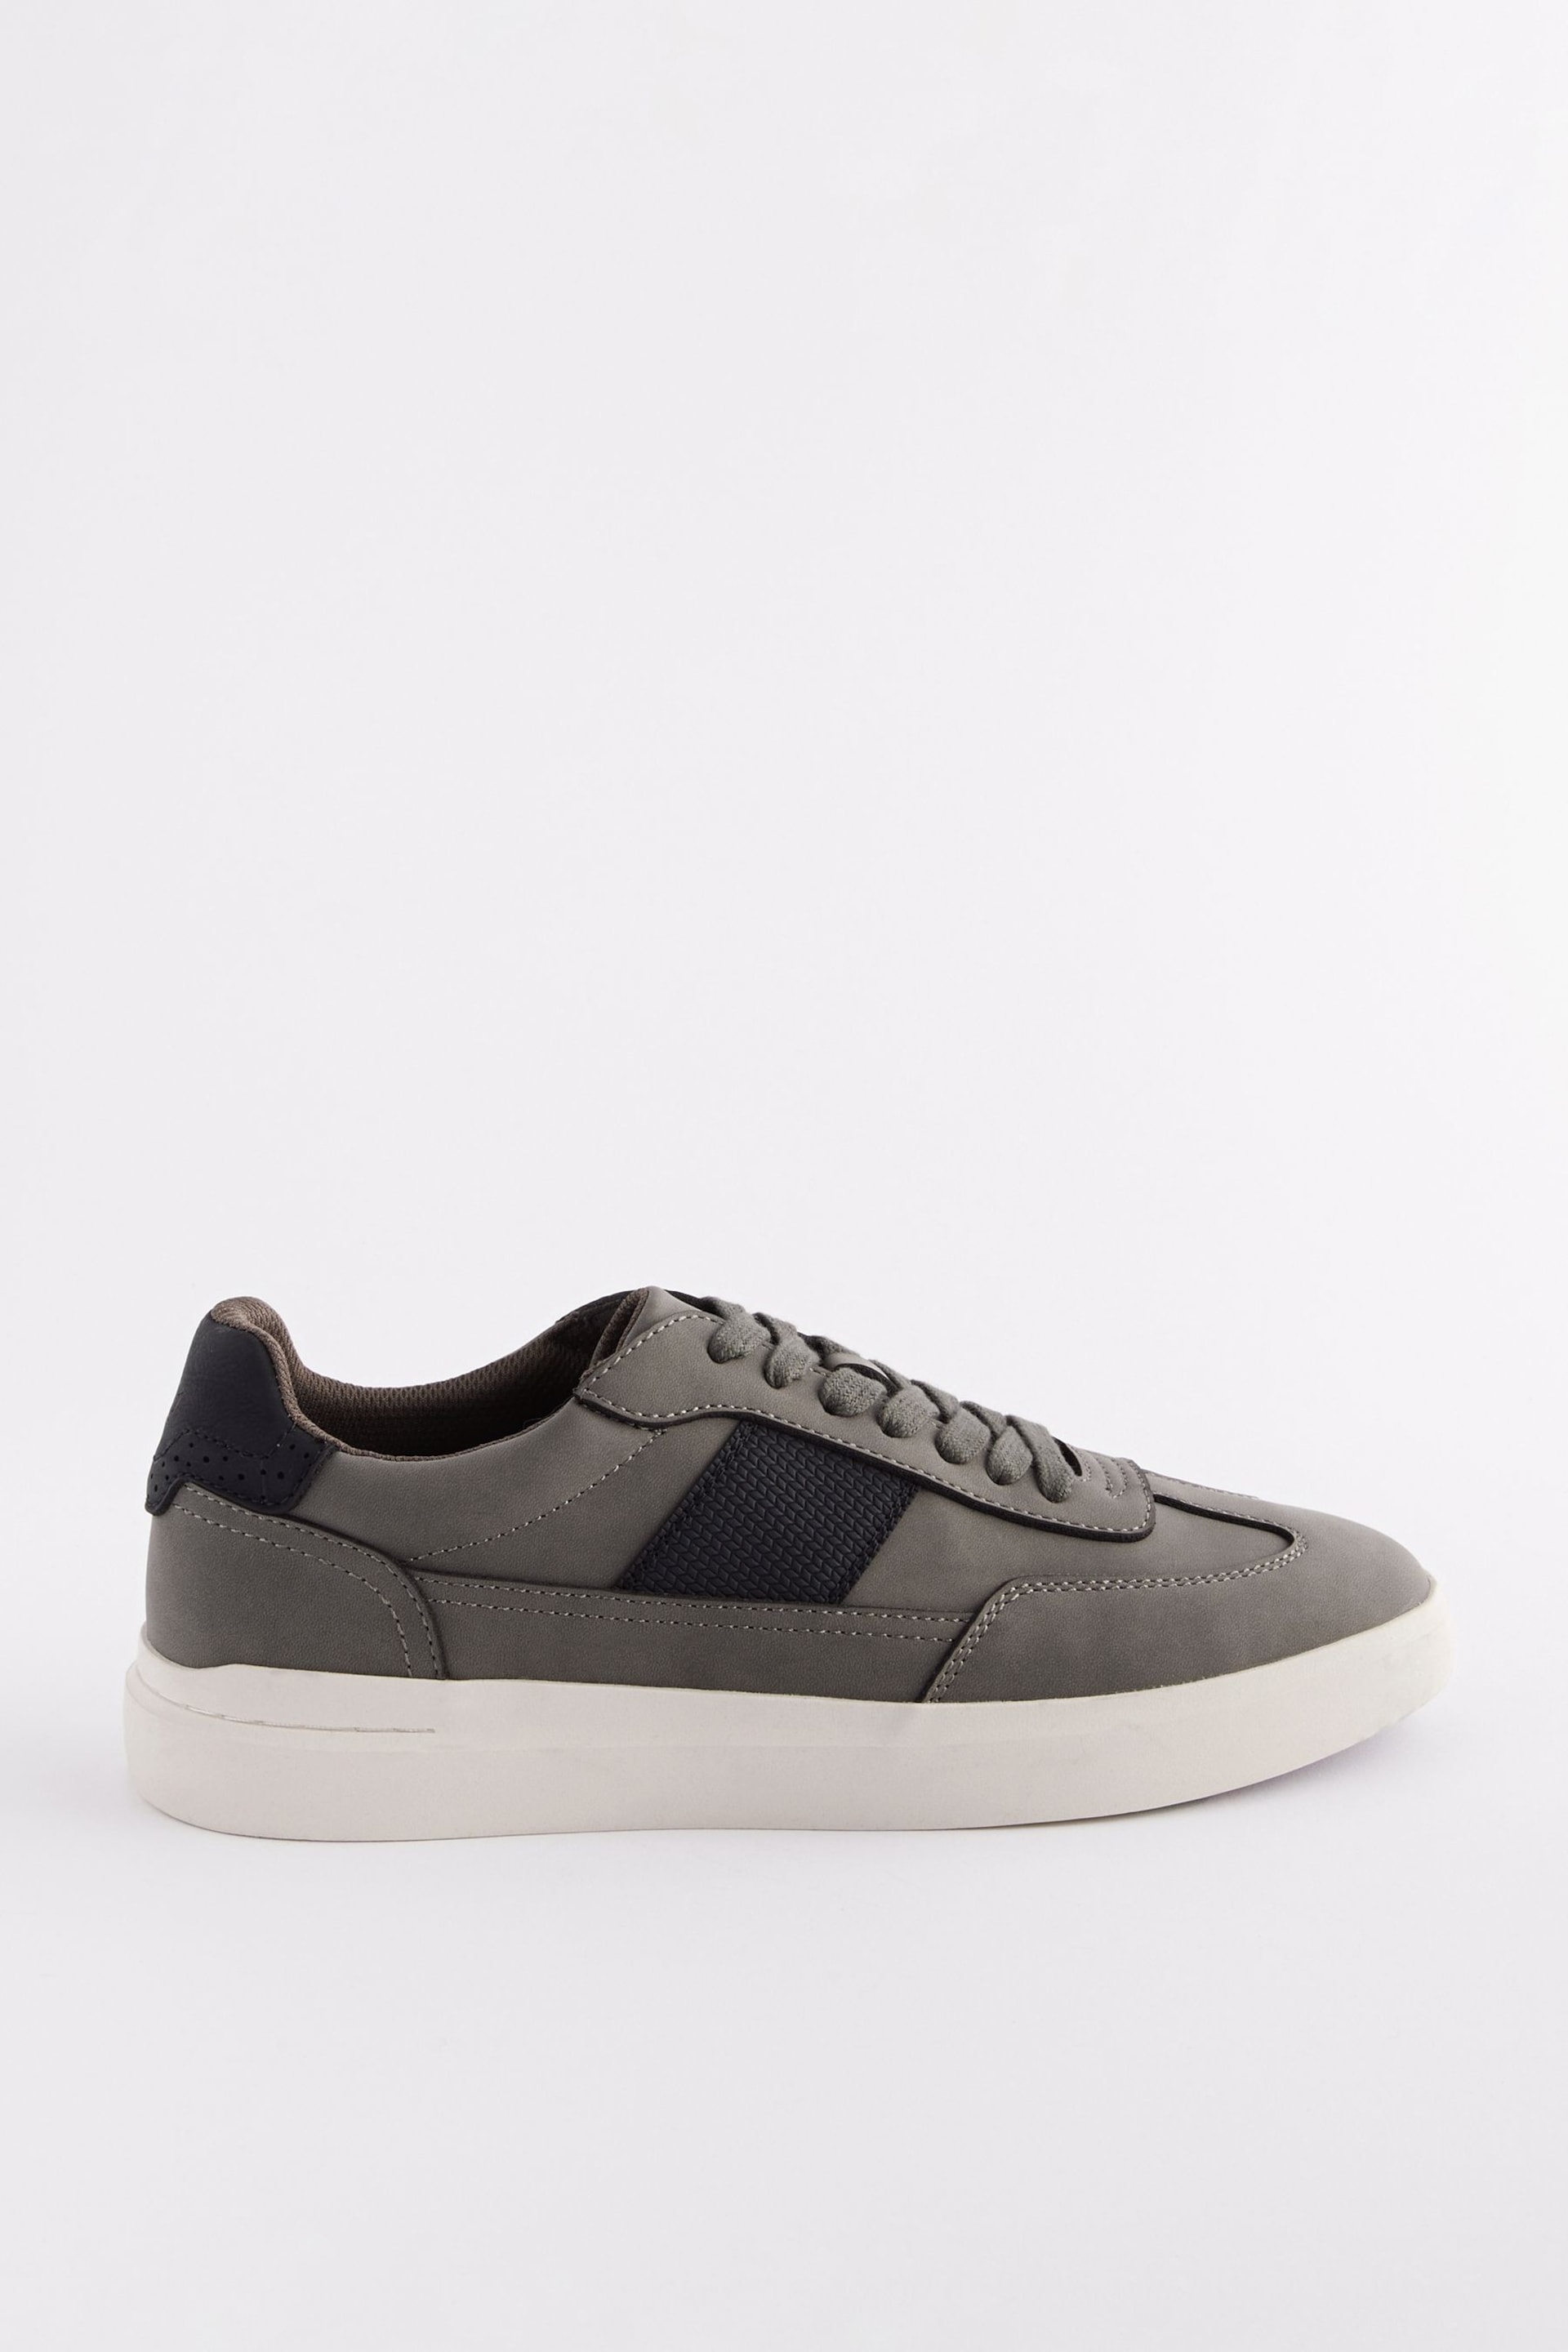 Grey Smart Trainers - Image 3 of 7